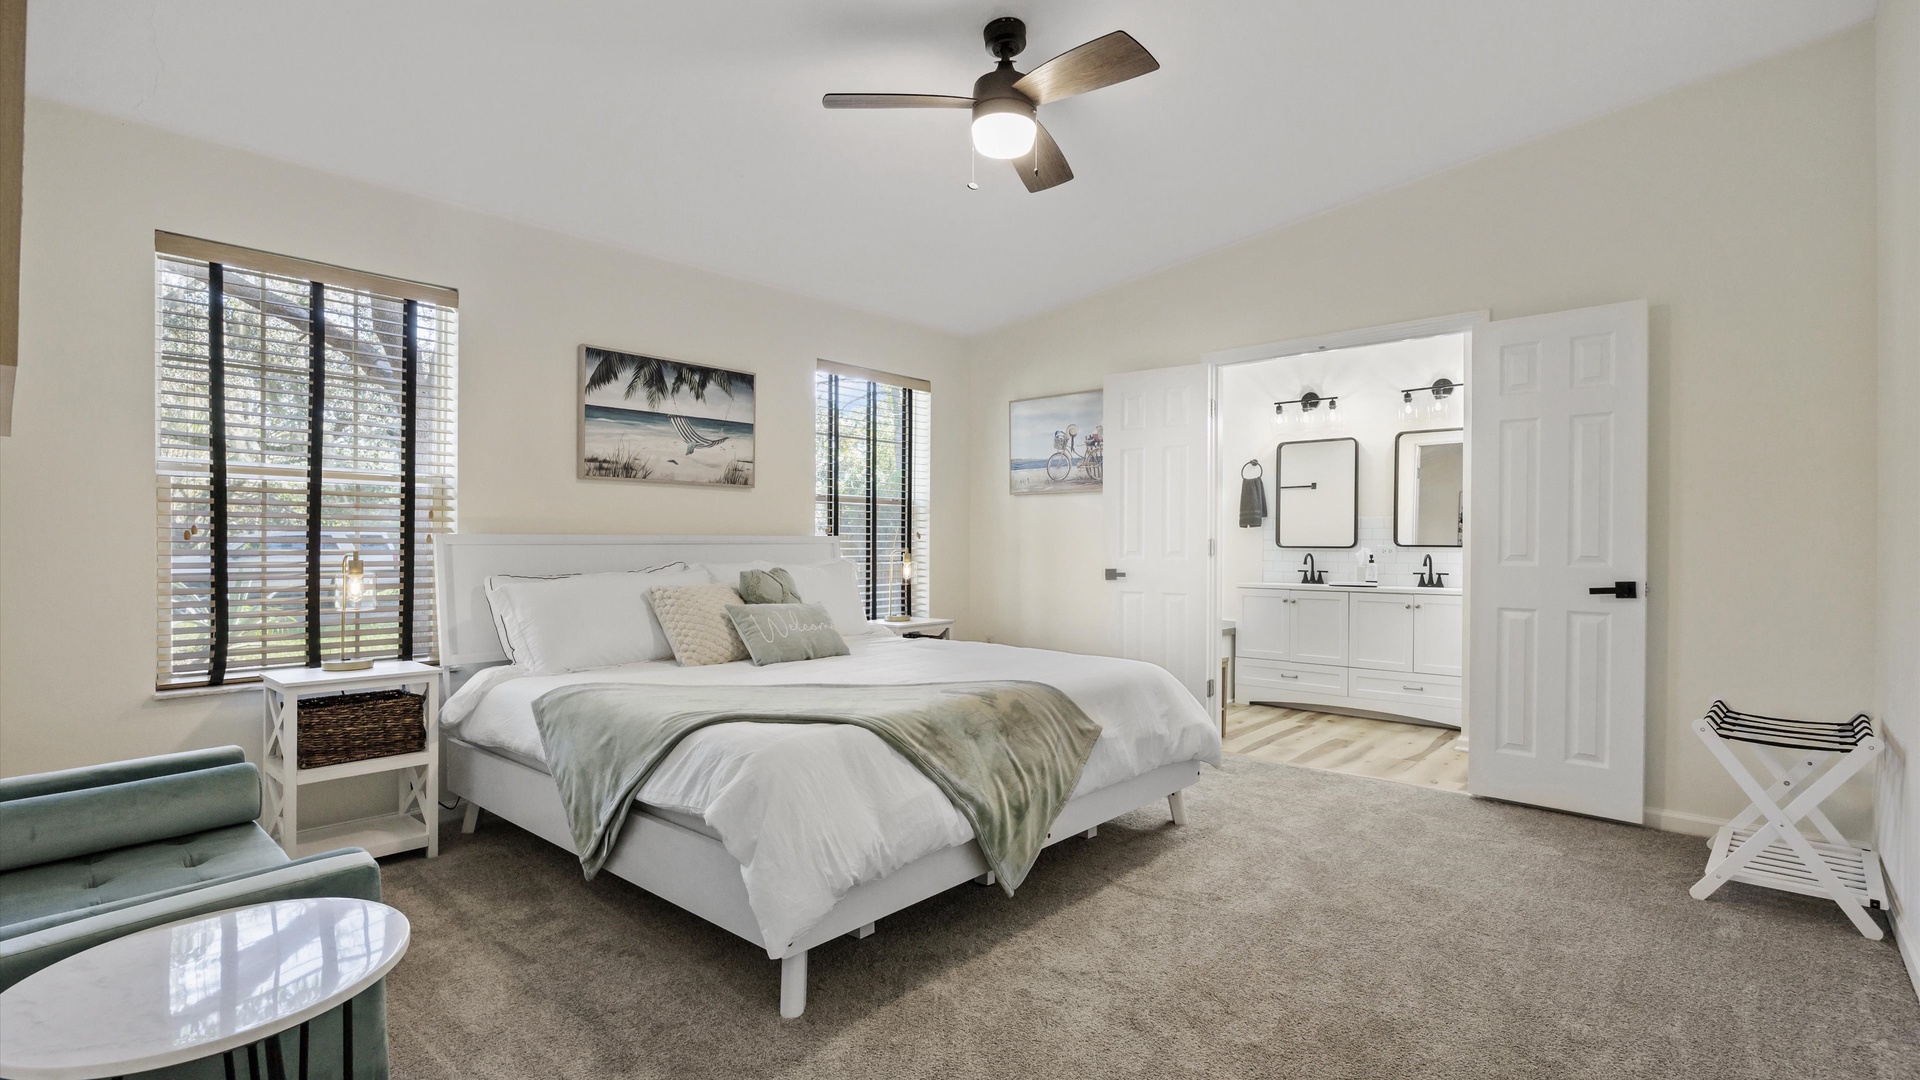 The master suite boasts a king-sized bed & luxurious private ensuite